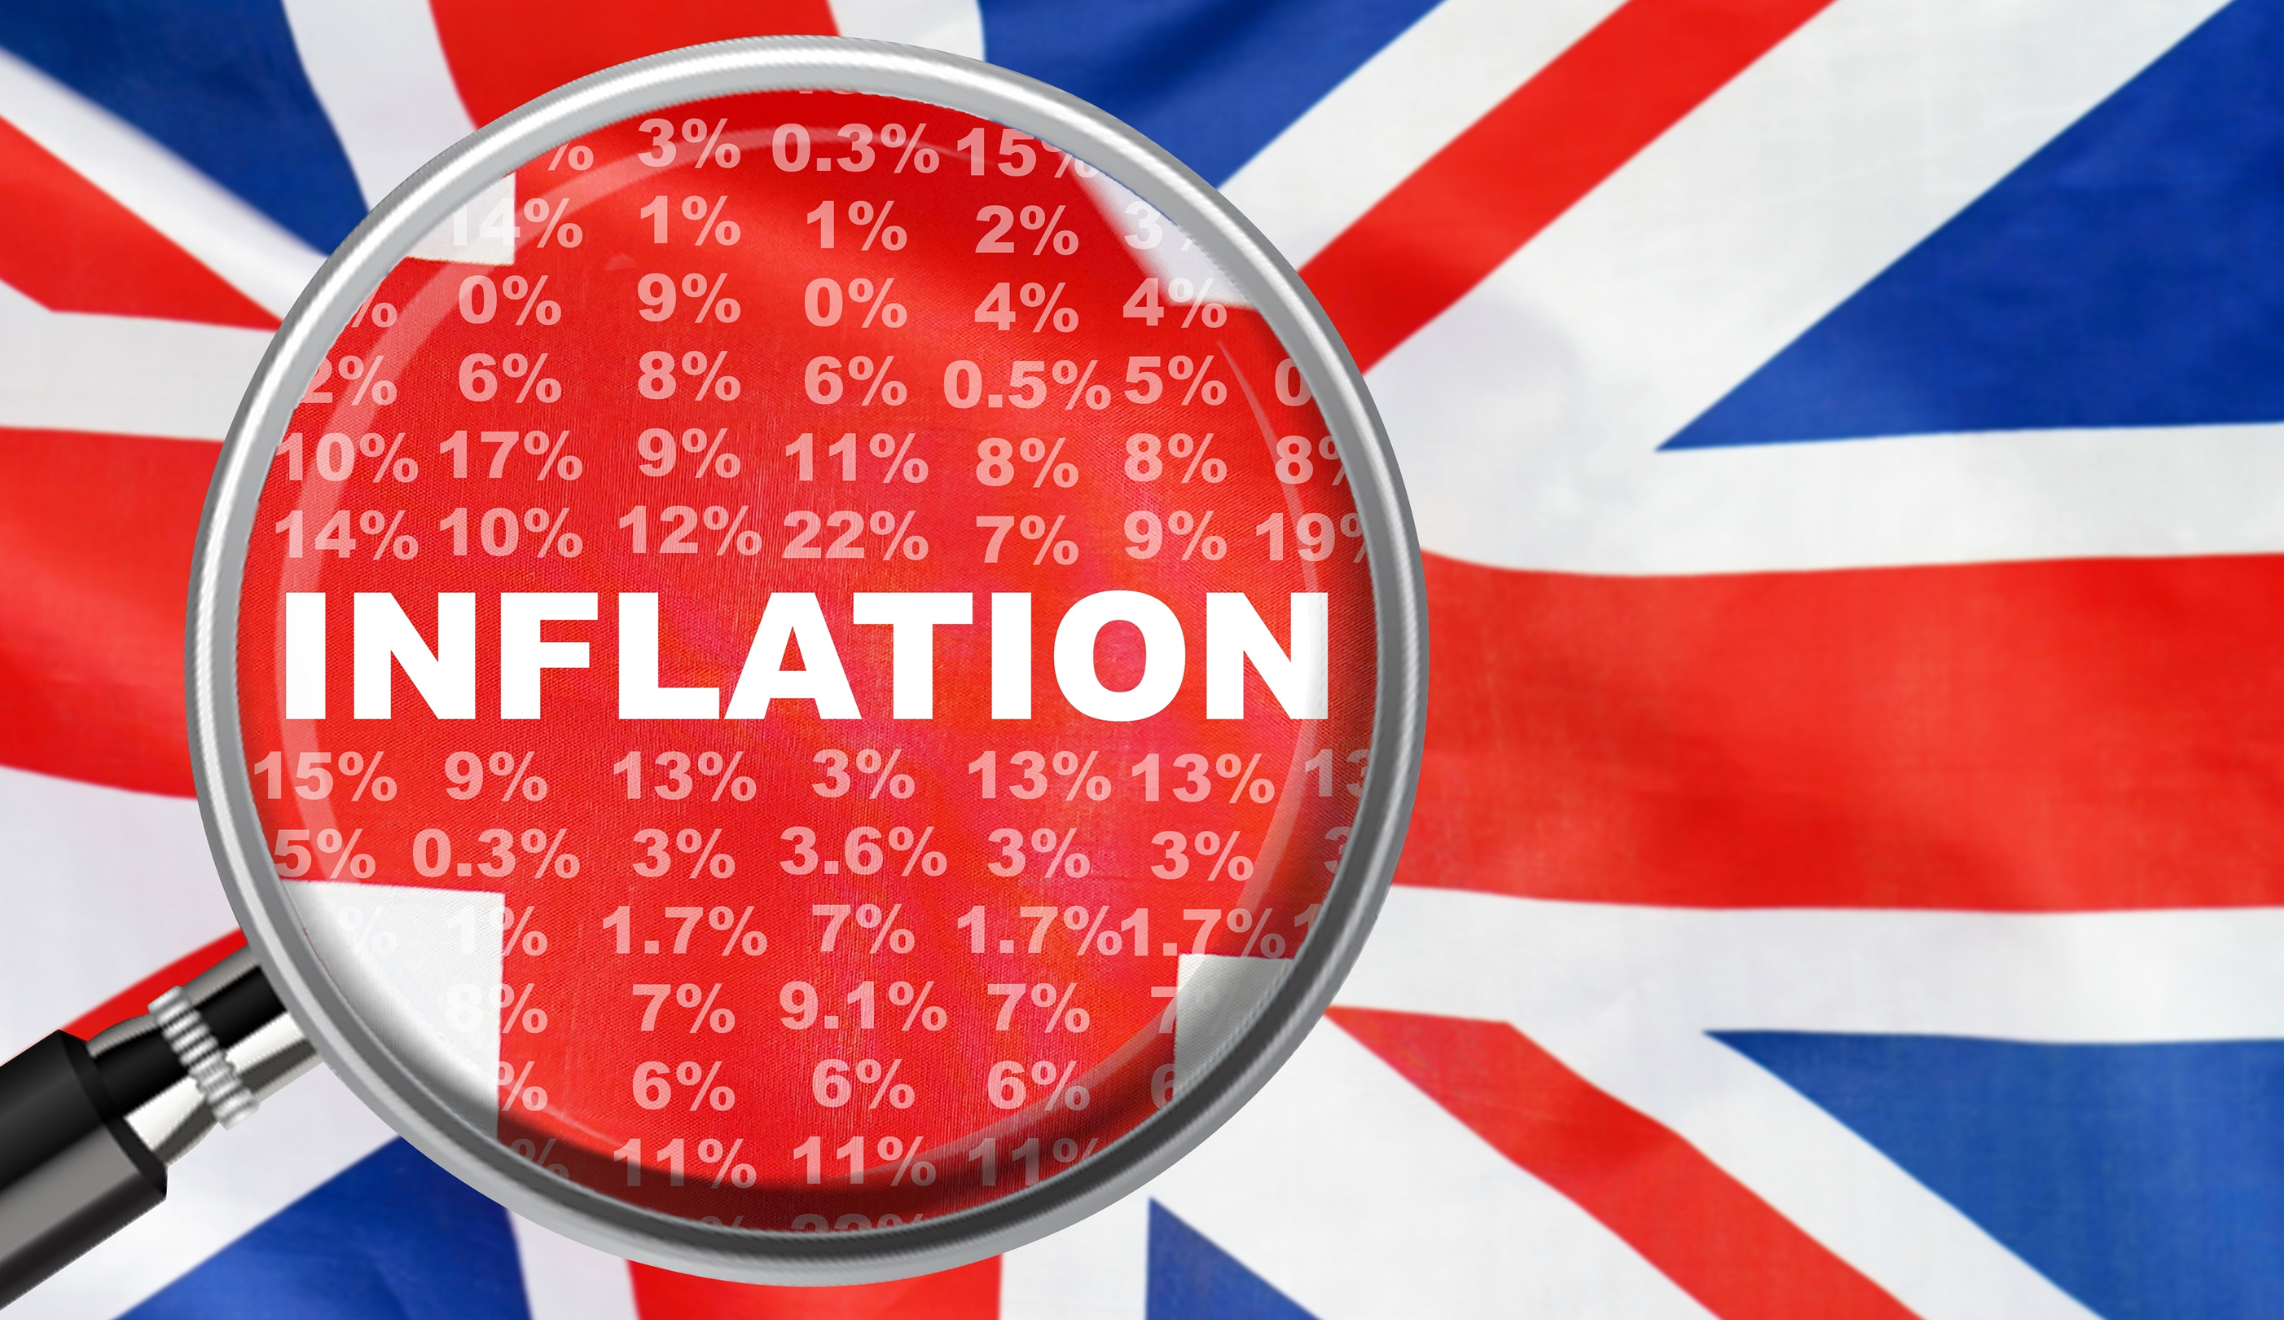 Data published by the Office for National Statistics (ONS) shows inflation down to 7.9%. Banner Photo